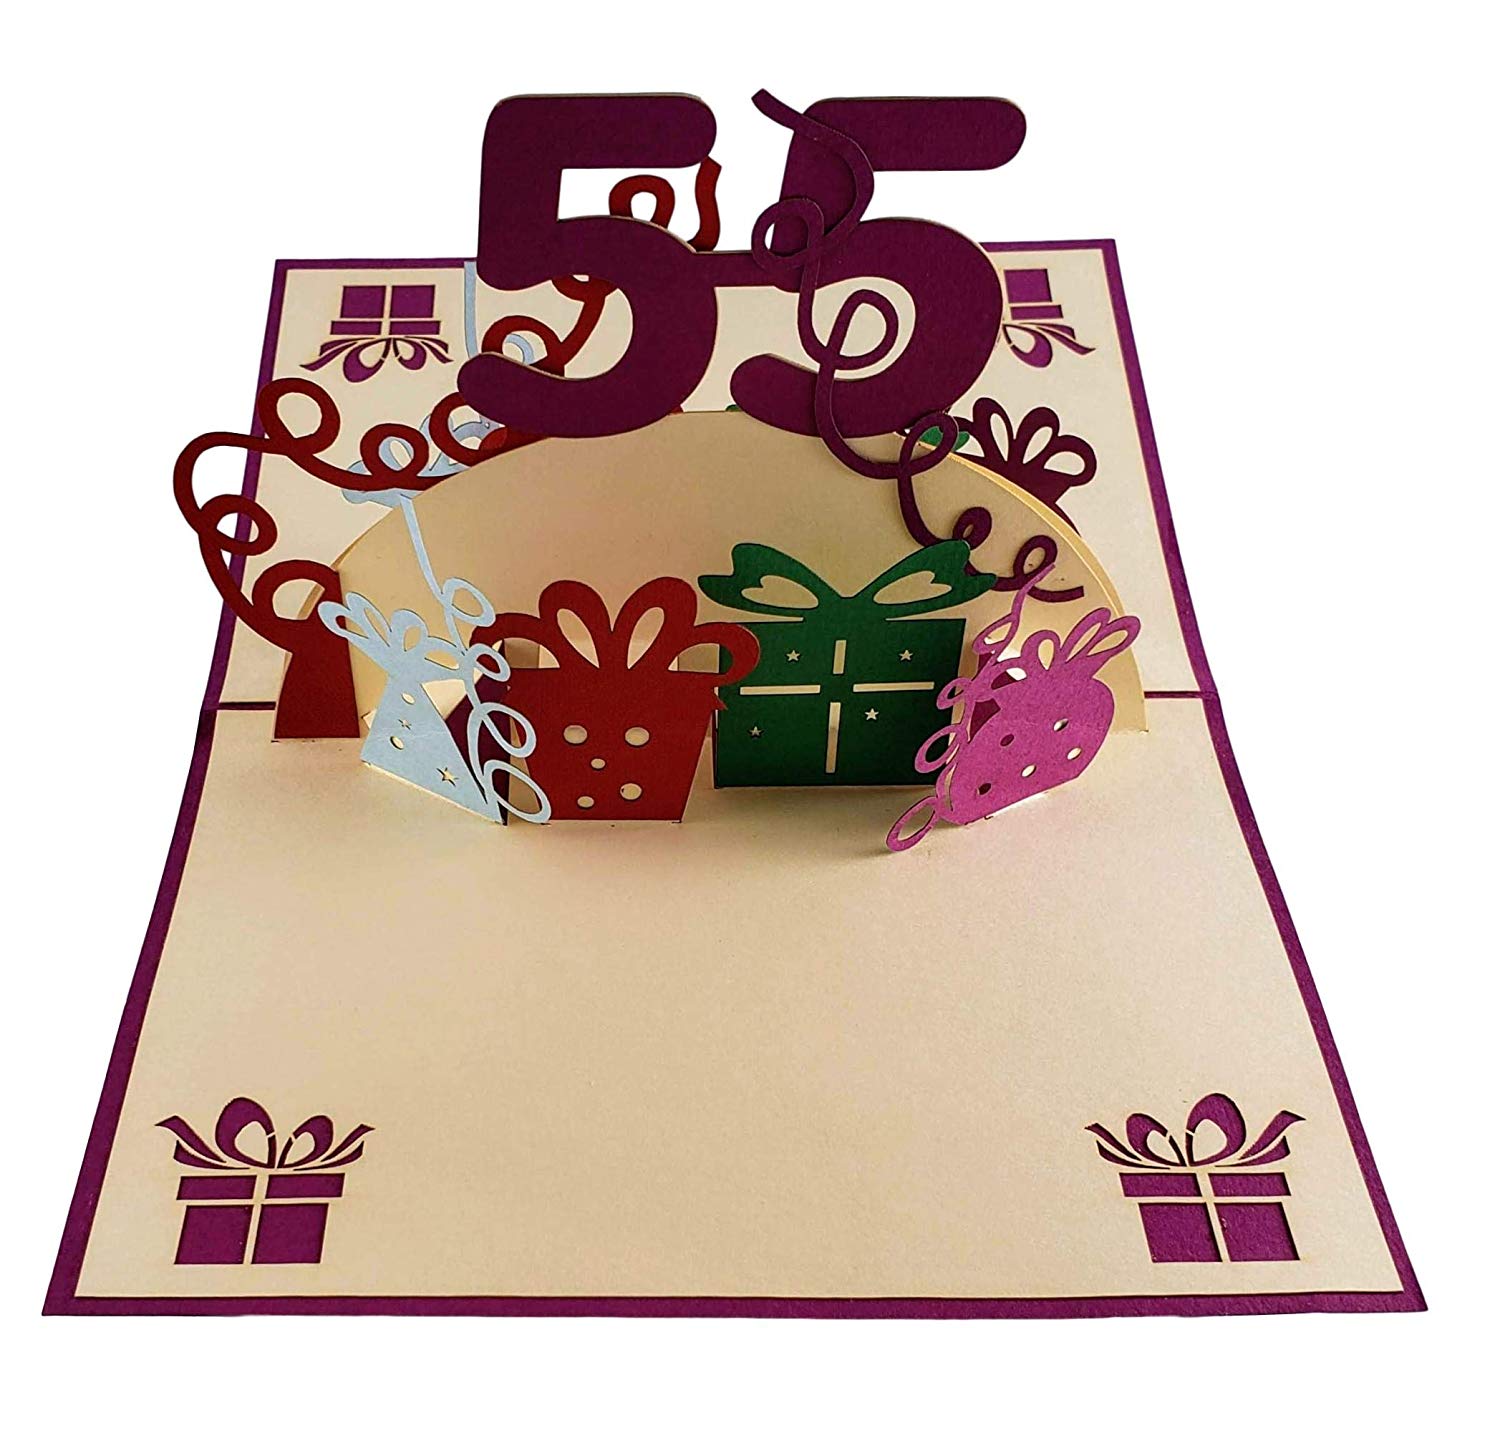 Happy 55th Birthday With Lots of Presents 3D Pop Up Greeting Card - Age - best deal - Birthday - iGifts And Cards